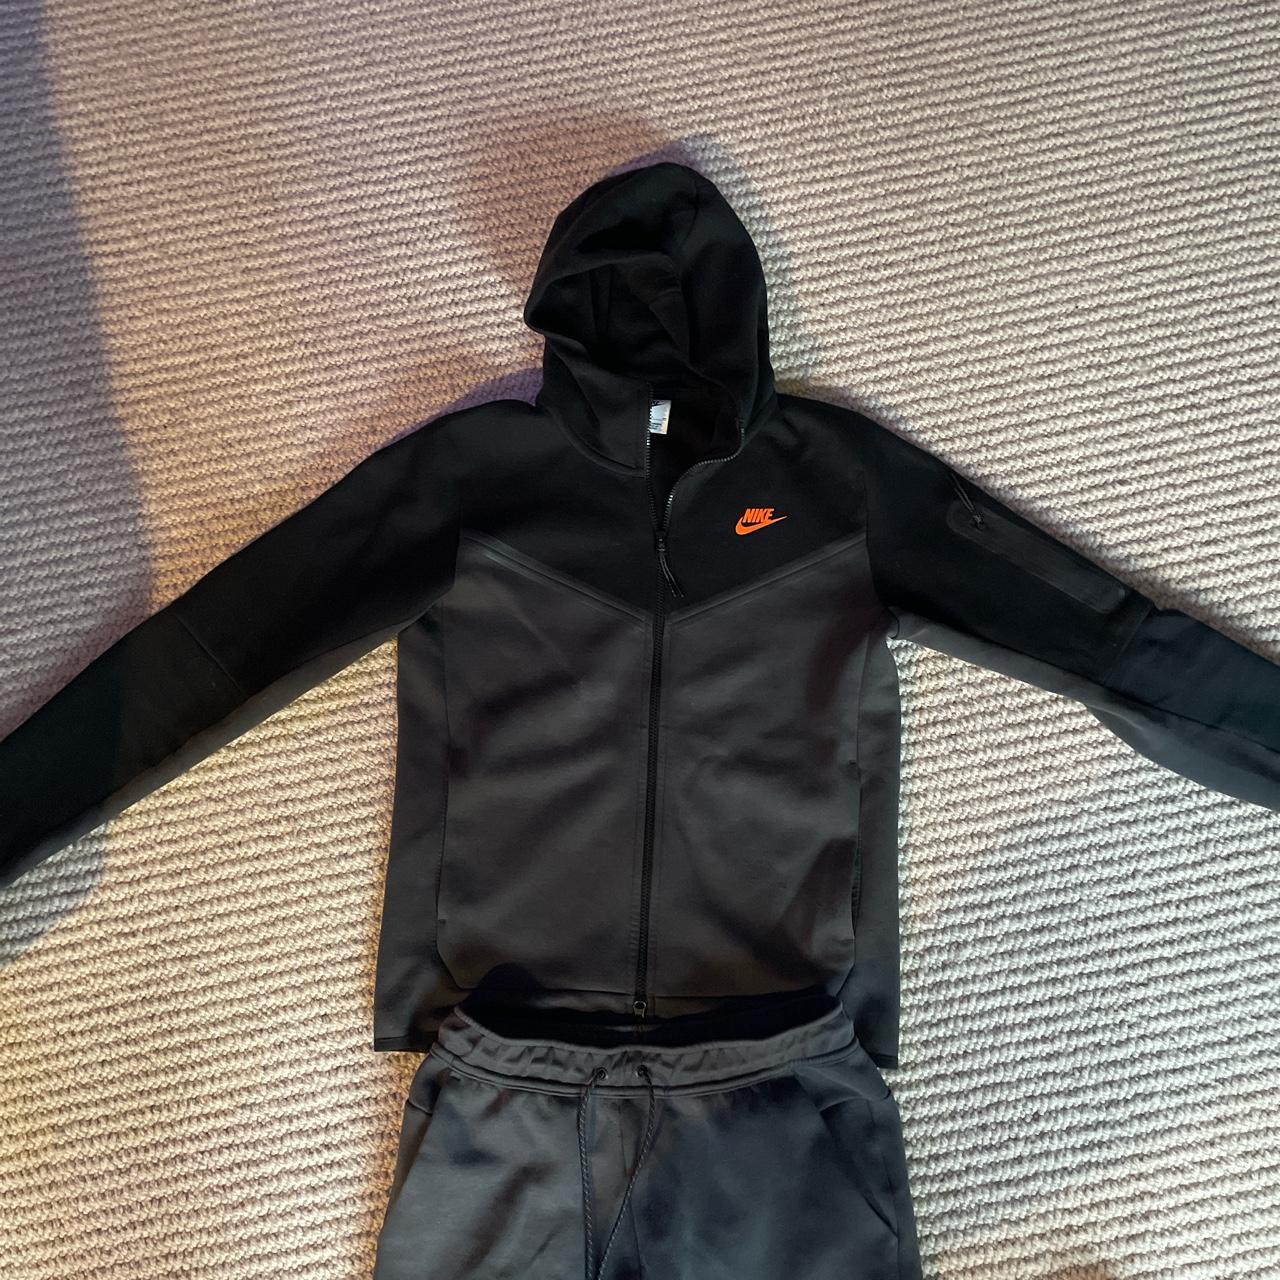 Nike tech fleece I will tho k about swapping for... - Depop